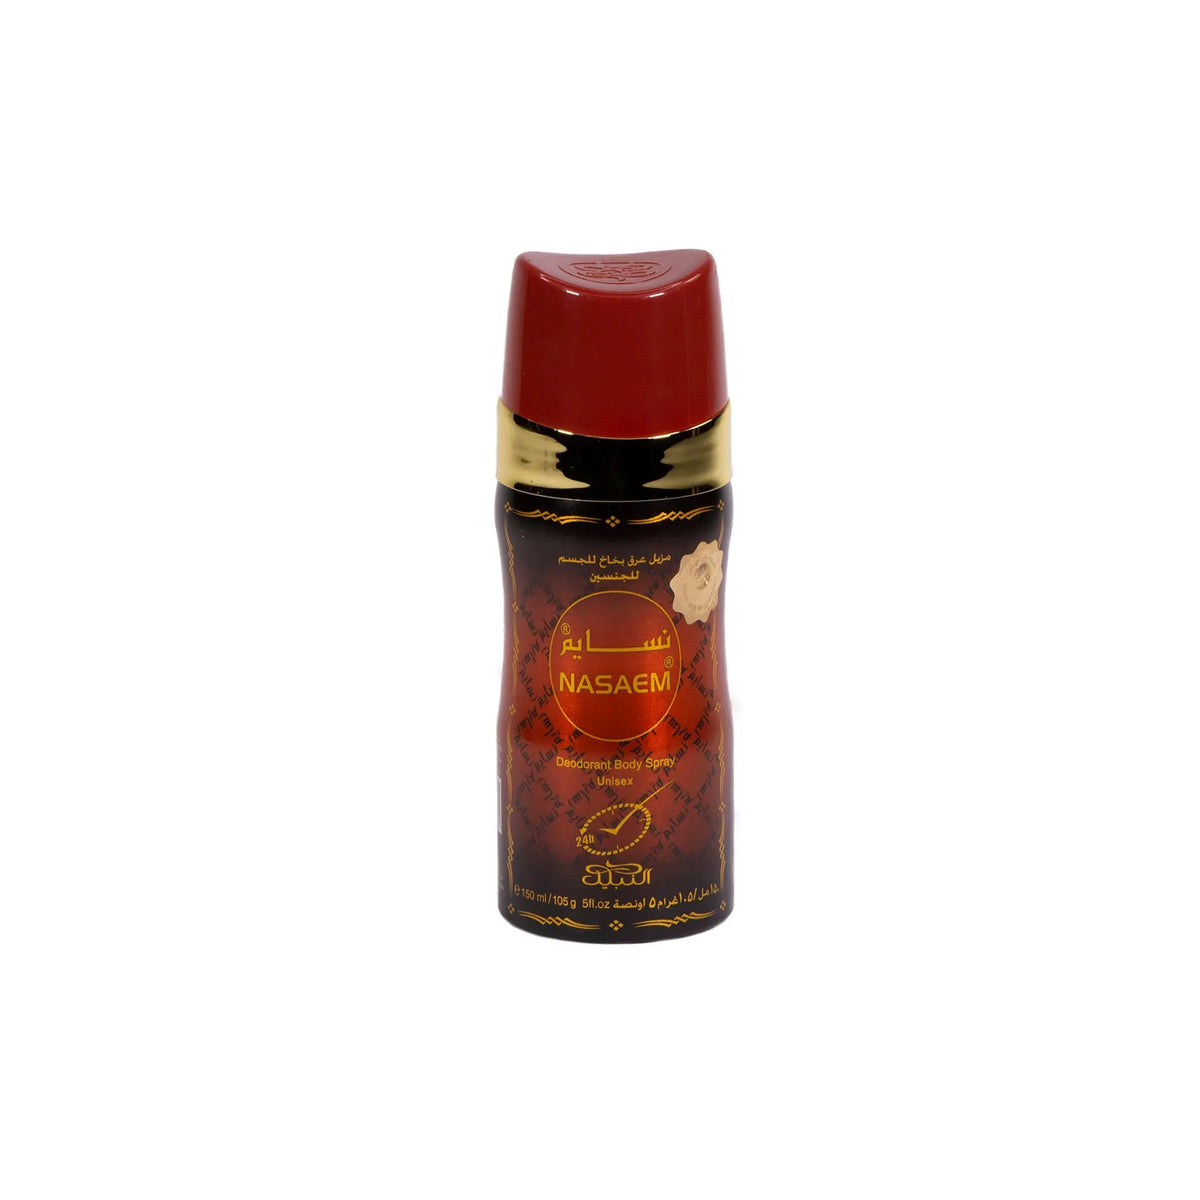 The image shows a can of 'Nasaem' deodorant body spray from Nabeel Perfumes. The can has a burgundy cap, a gold band, and a body with a gradient design going from transparent to a deep red hue towards the bottom. It has gold and white Arabic script along with English text indicating it is a unisex product. The content volume is labeled as 150ml (5.07 fl.oz). The design elements of the can suggest a luxurious and aromatic fragrance within.